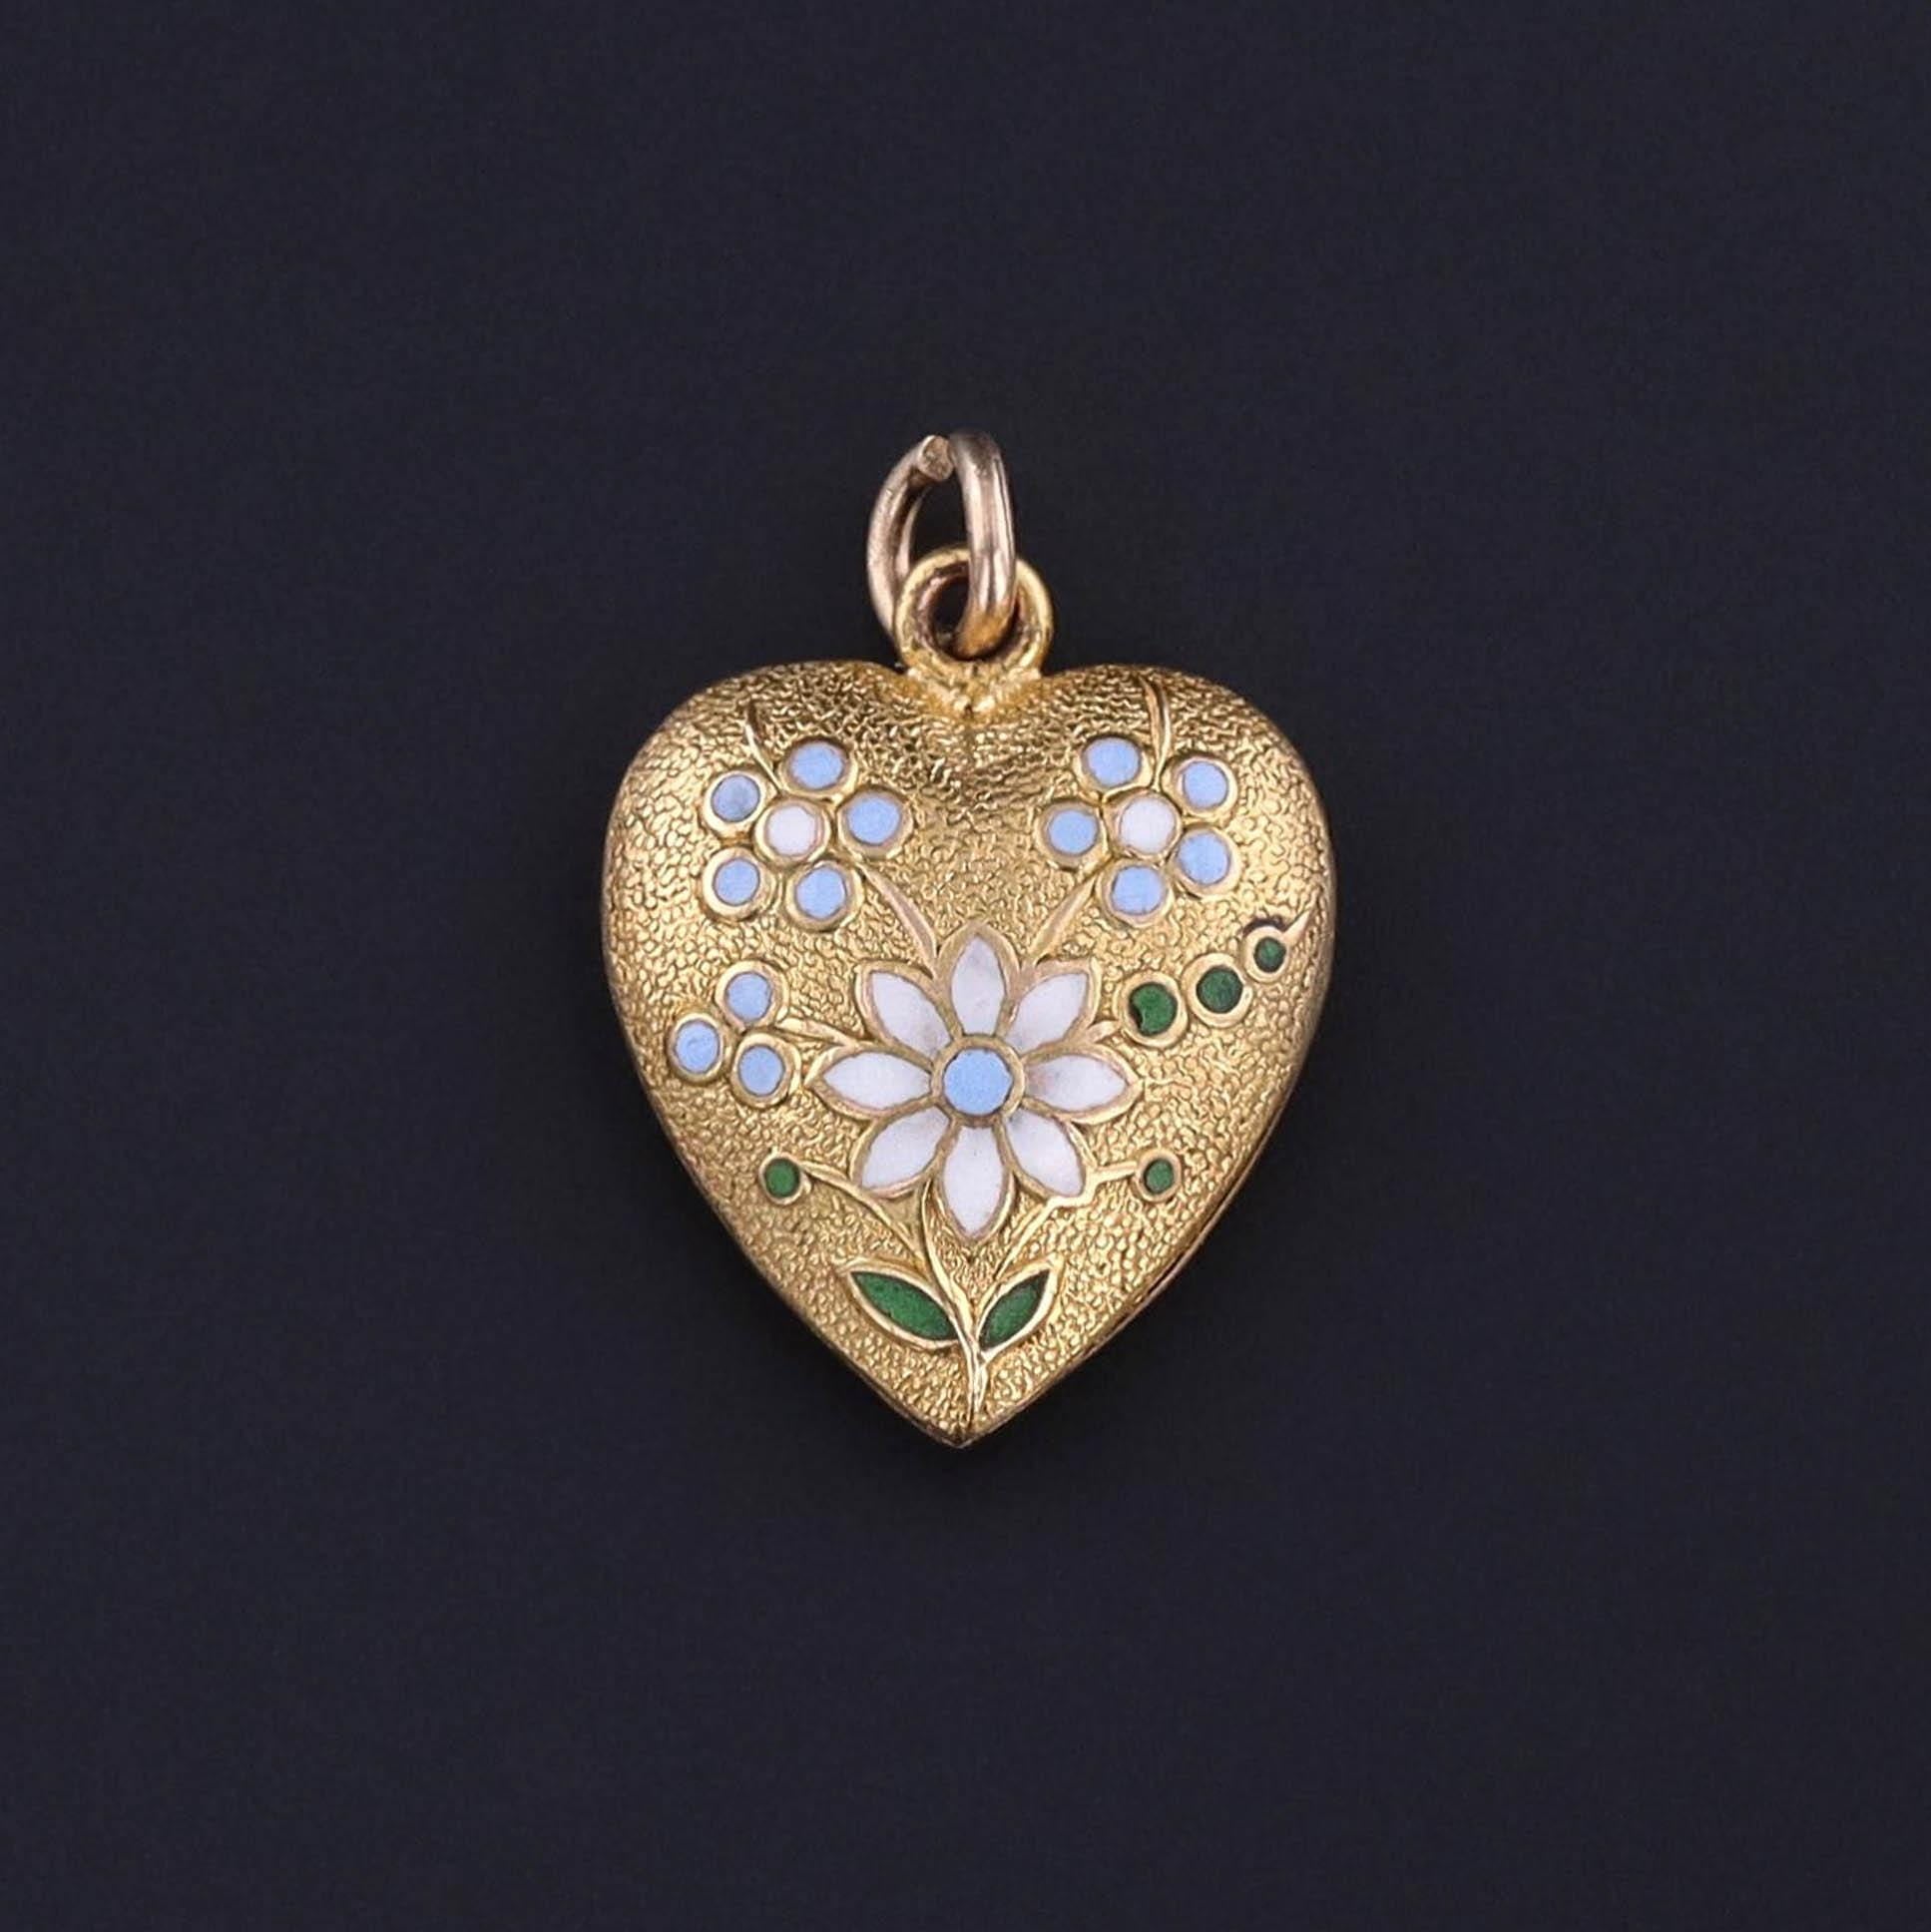 An antique 10k gold and enamel puffy heart charm from the late Victorian era. The charm would be a beautiful love token or perfect gift for an antique jewelry or charm collector.